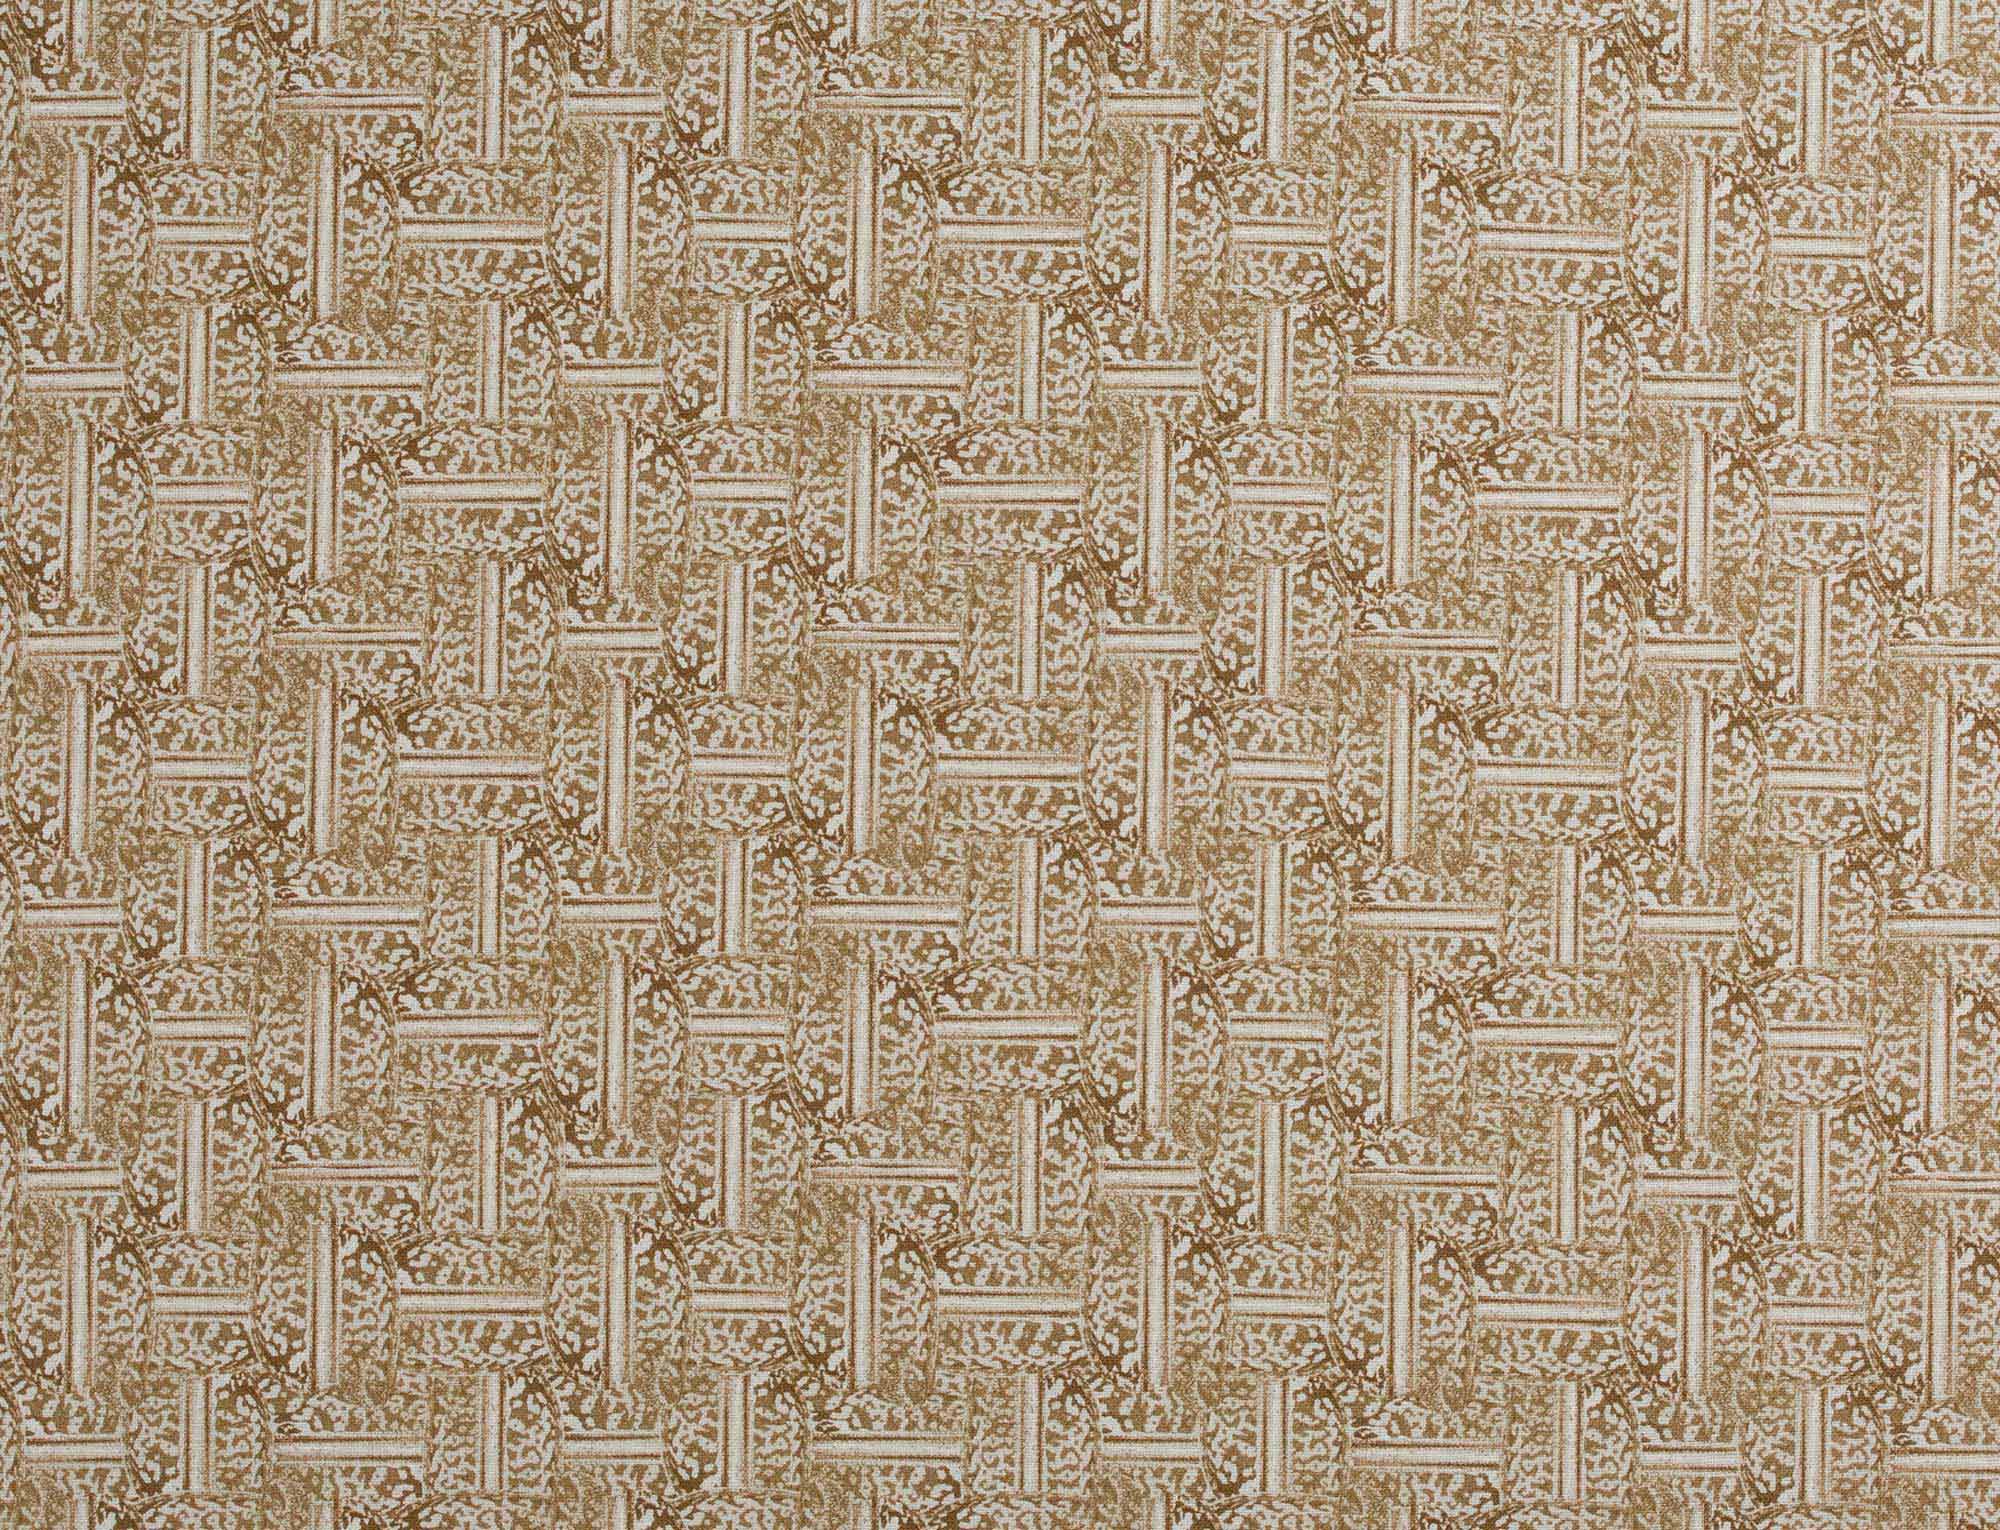 Detail of fabric in a geometric grid pattern in brown on a cream field.